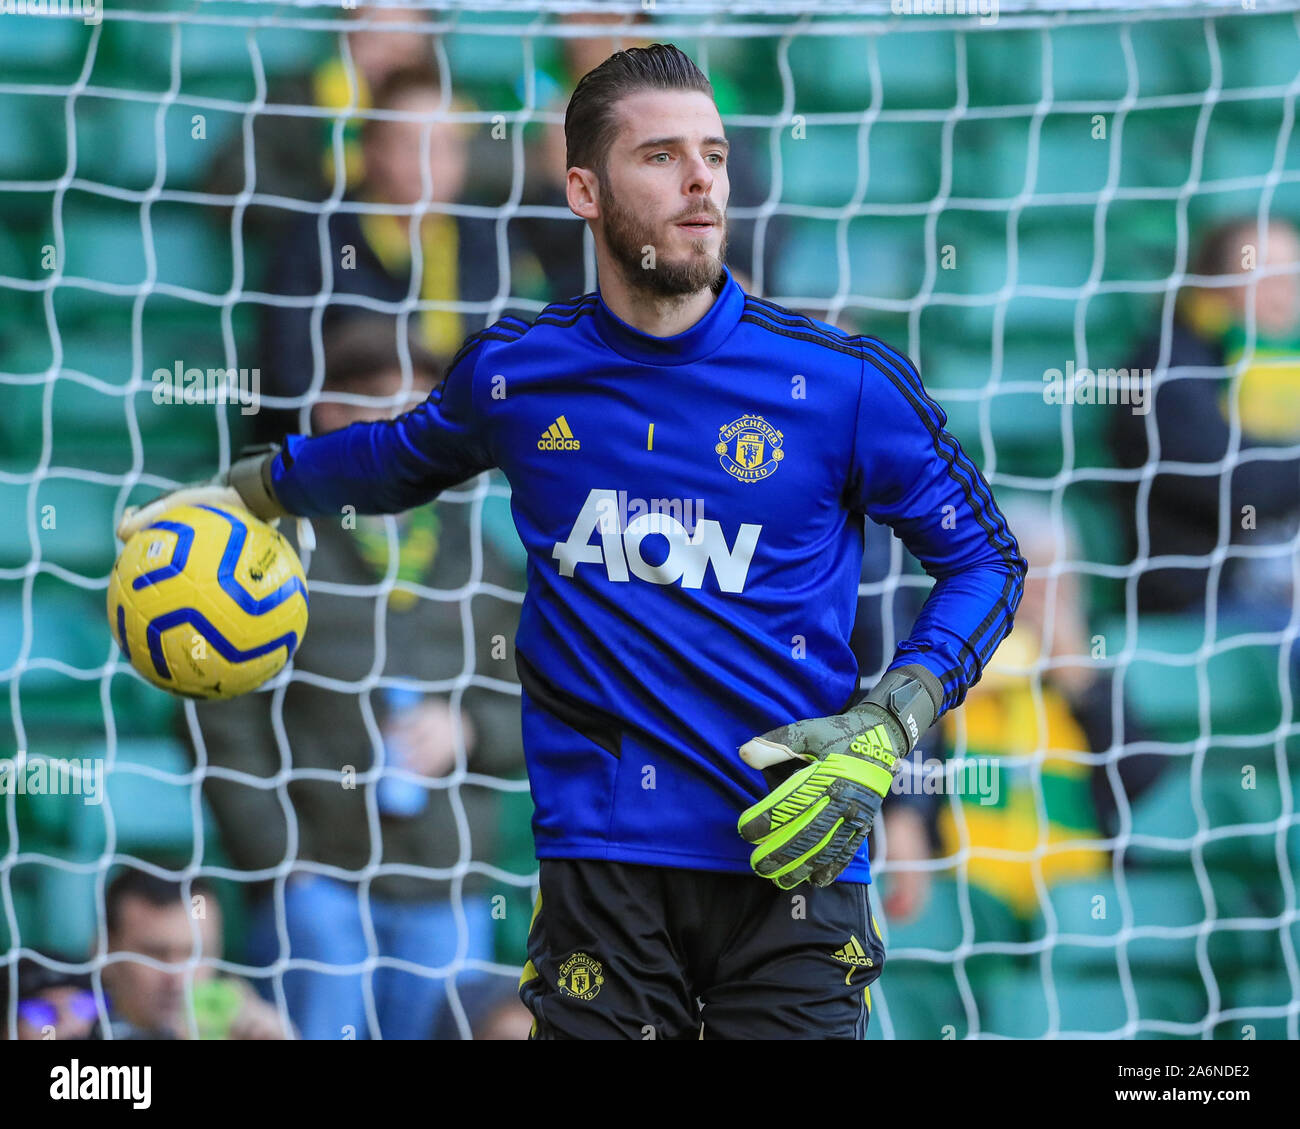 27th October 2019, Carrow Road, Norwich, England; Premier League, Norwich City v Manchester United : David de Gea (1) of Manchester United warming up  Credit: Mark Cosgrove/News Images Stock Photo